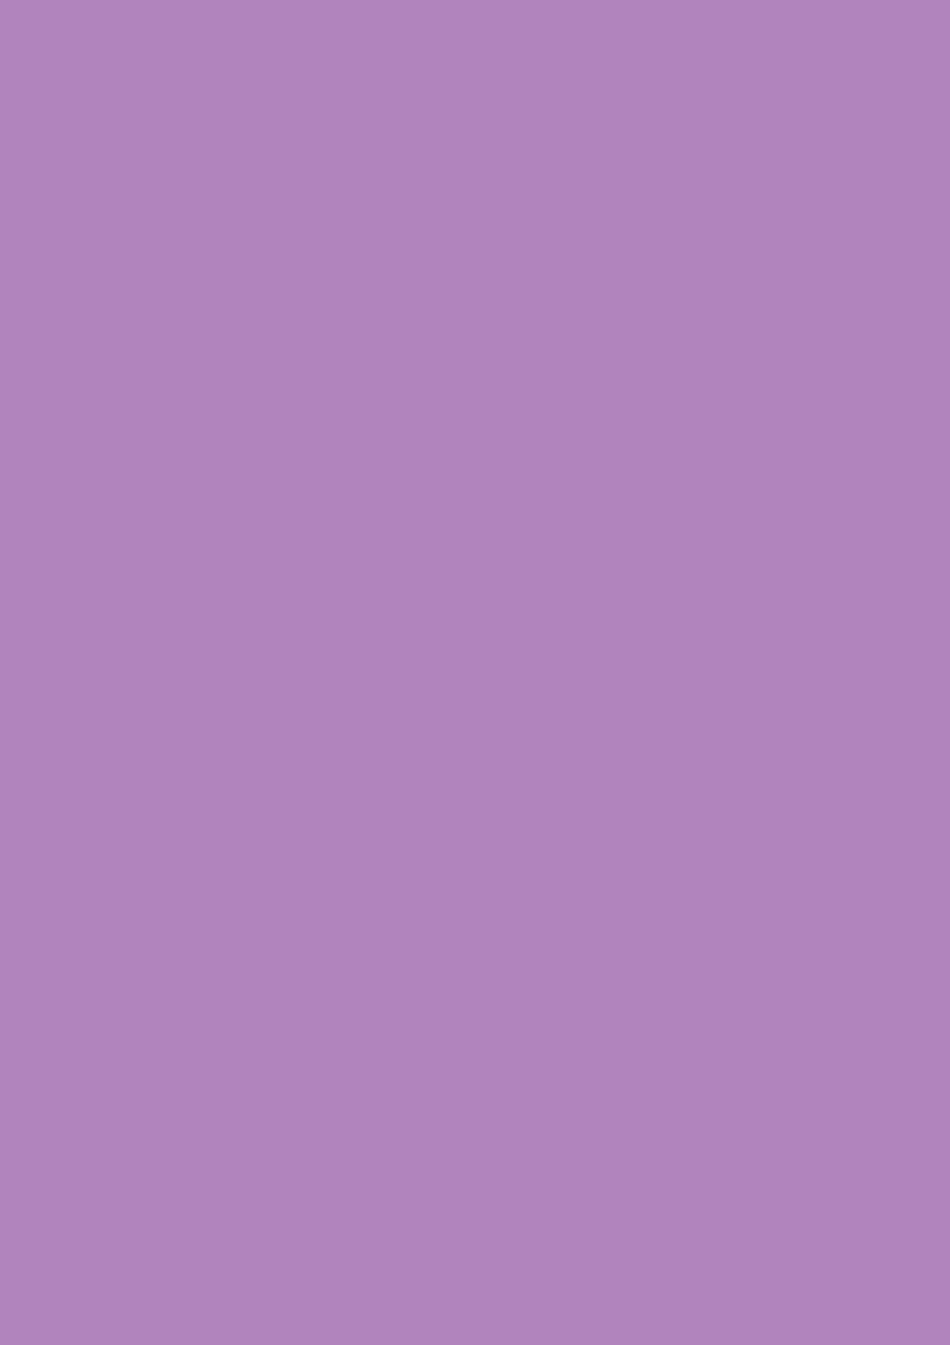 Solid purple and its vibrant hues Wallpaper